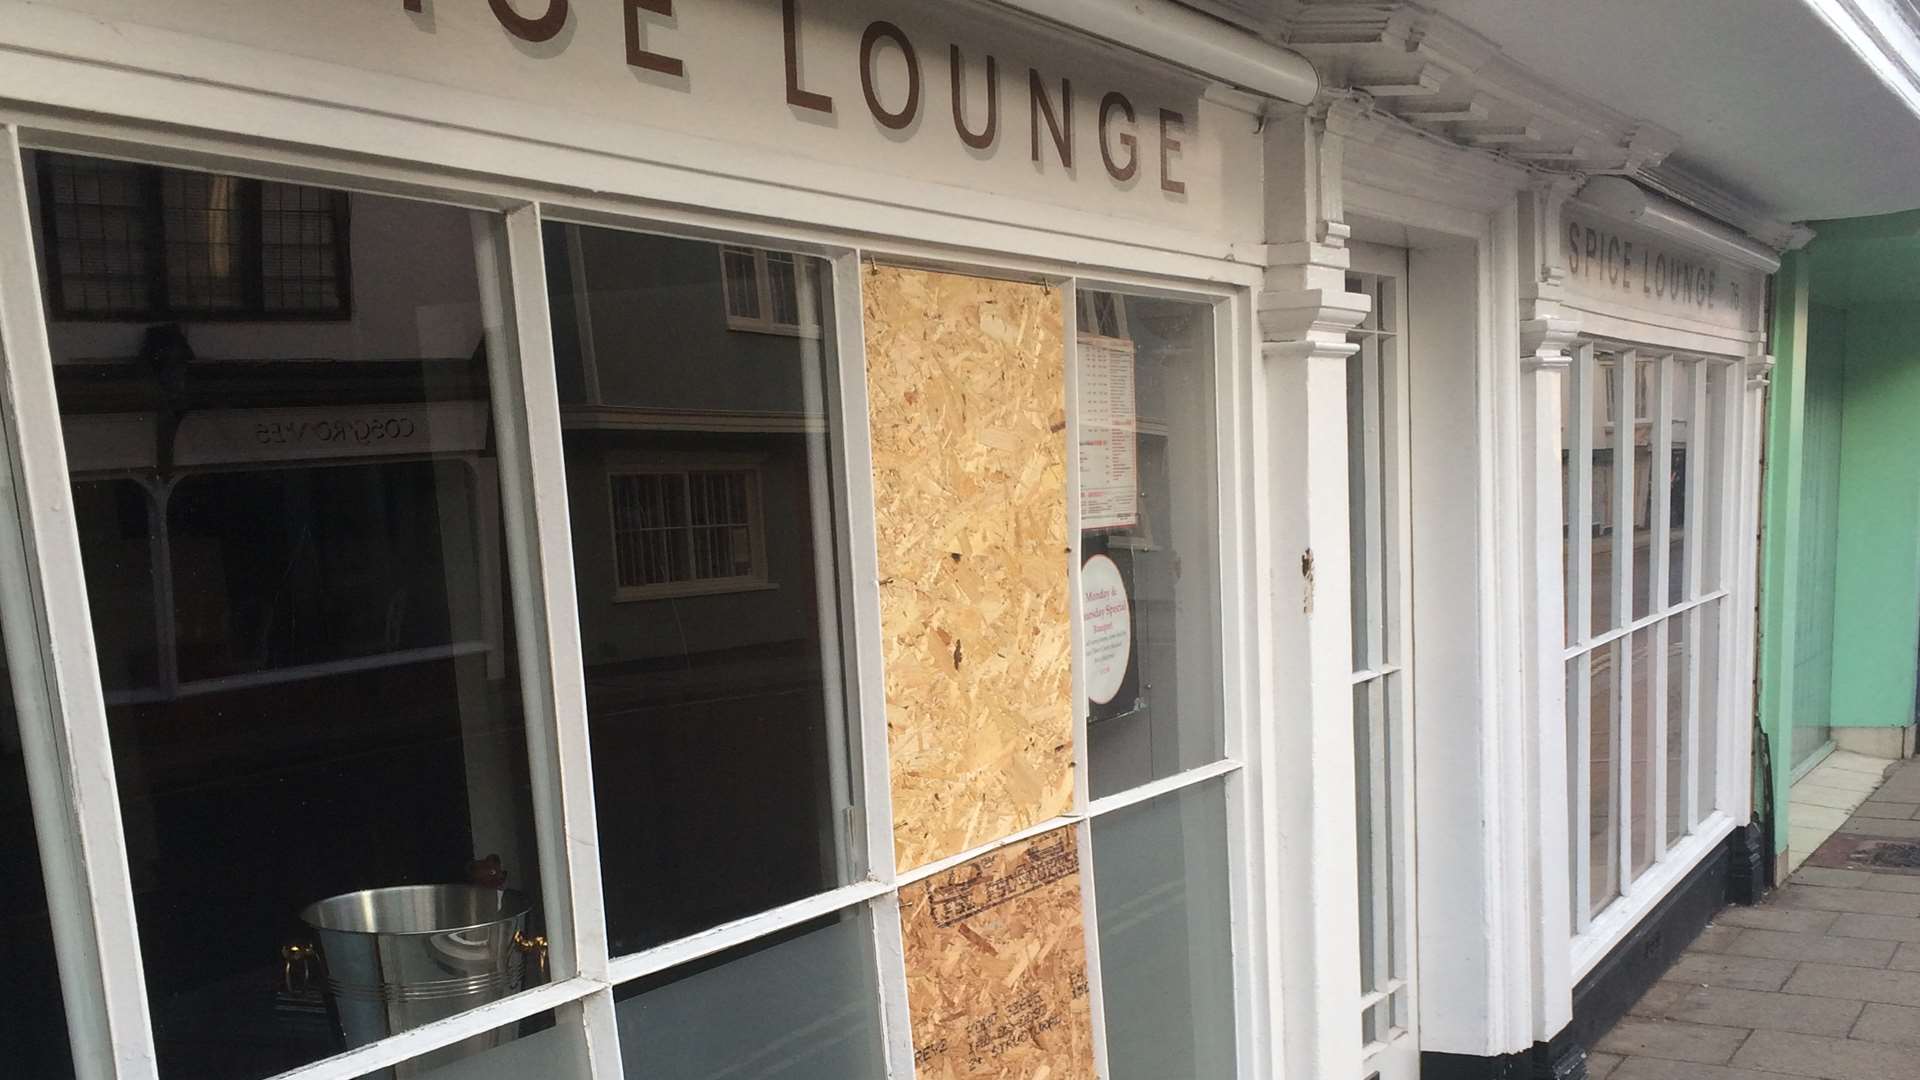 A window of the Spice Lounge was smashed.